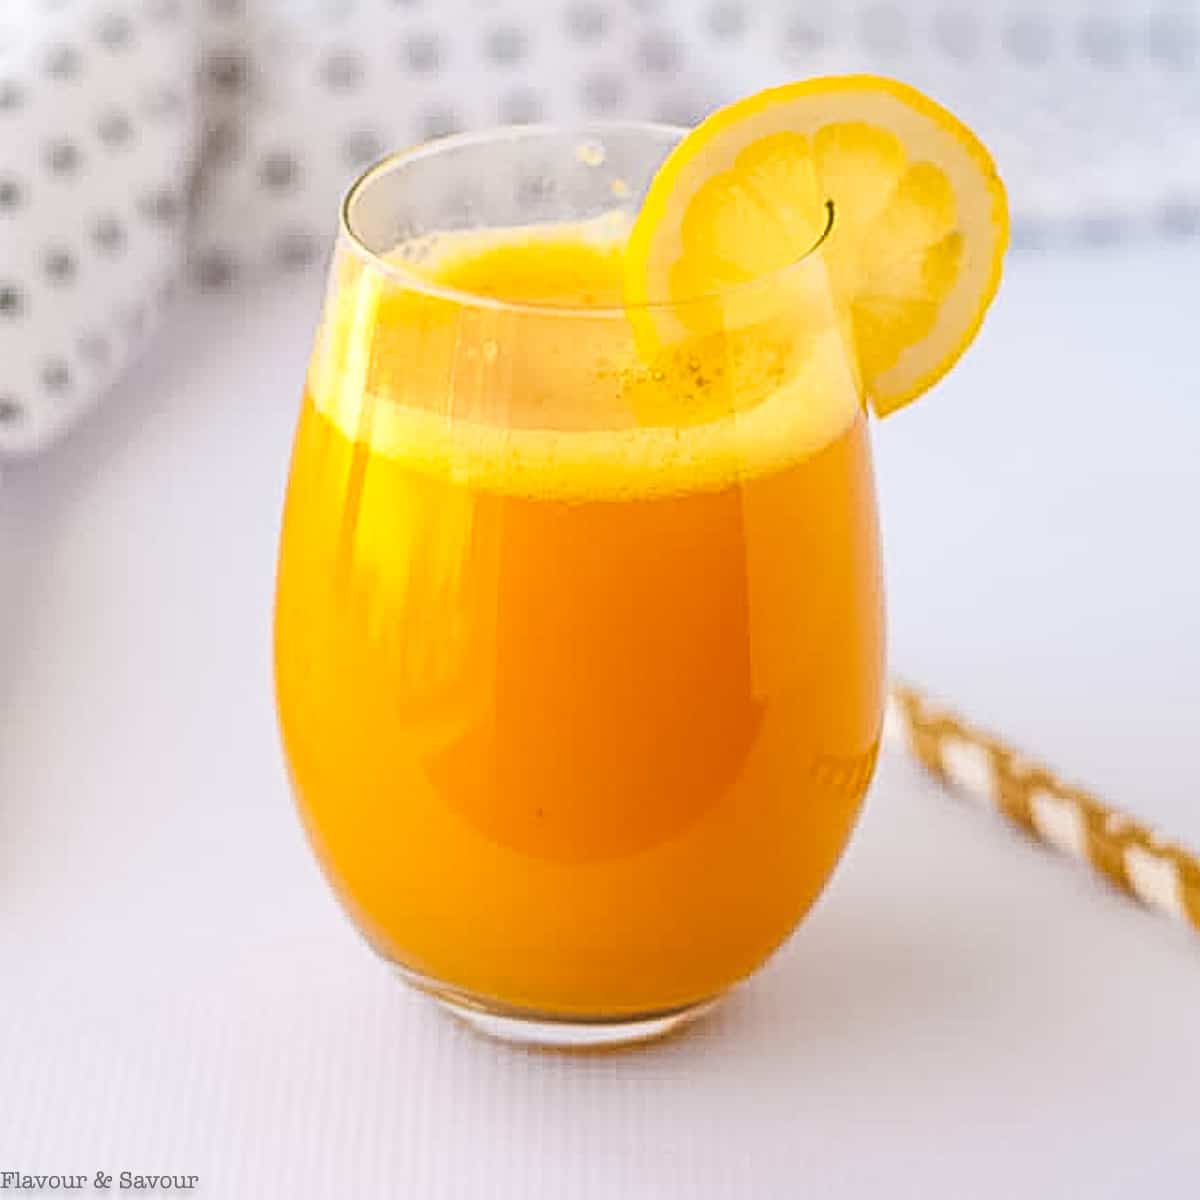 A glass of turmeric tonic garnished with a slice of lemon.